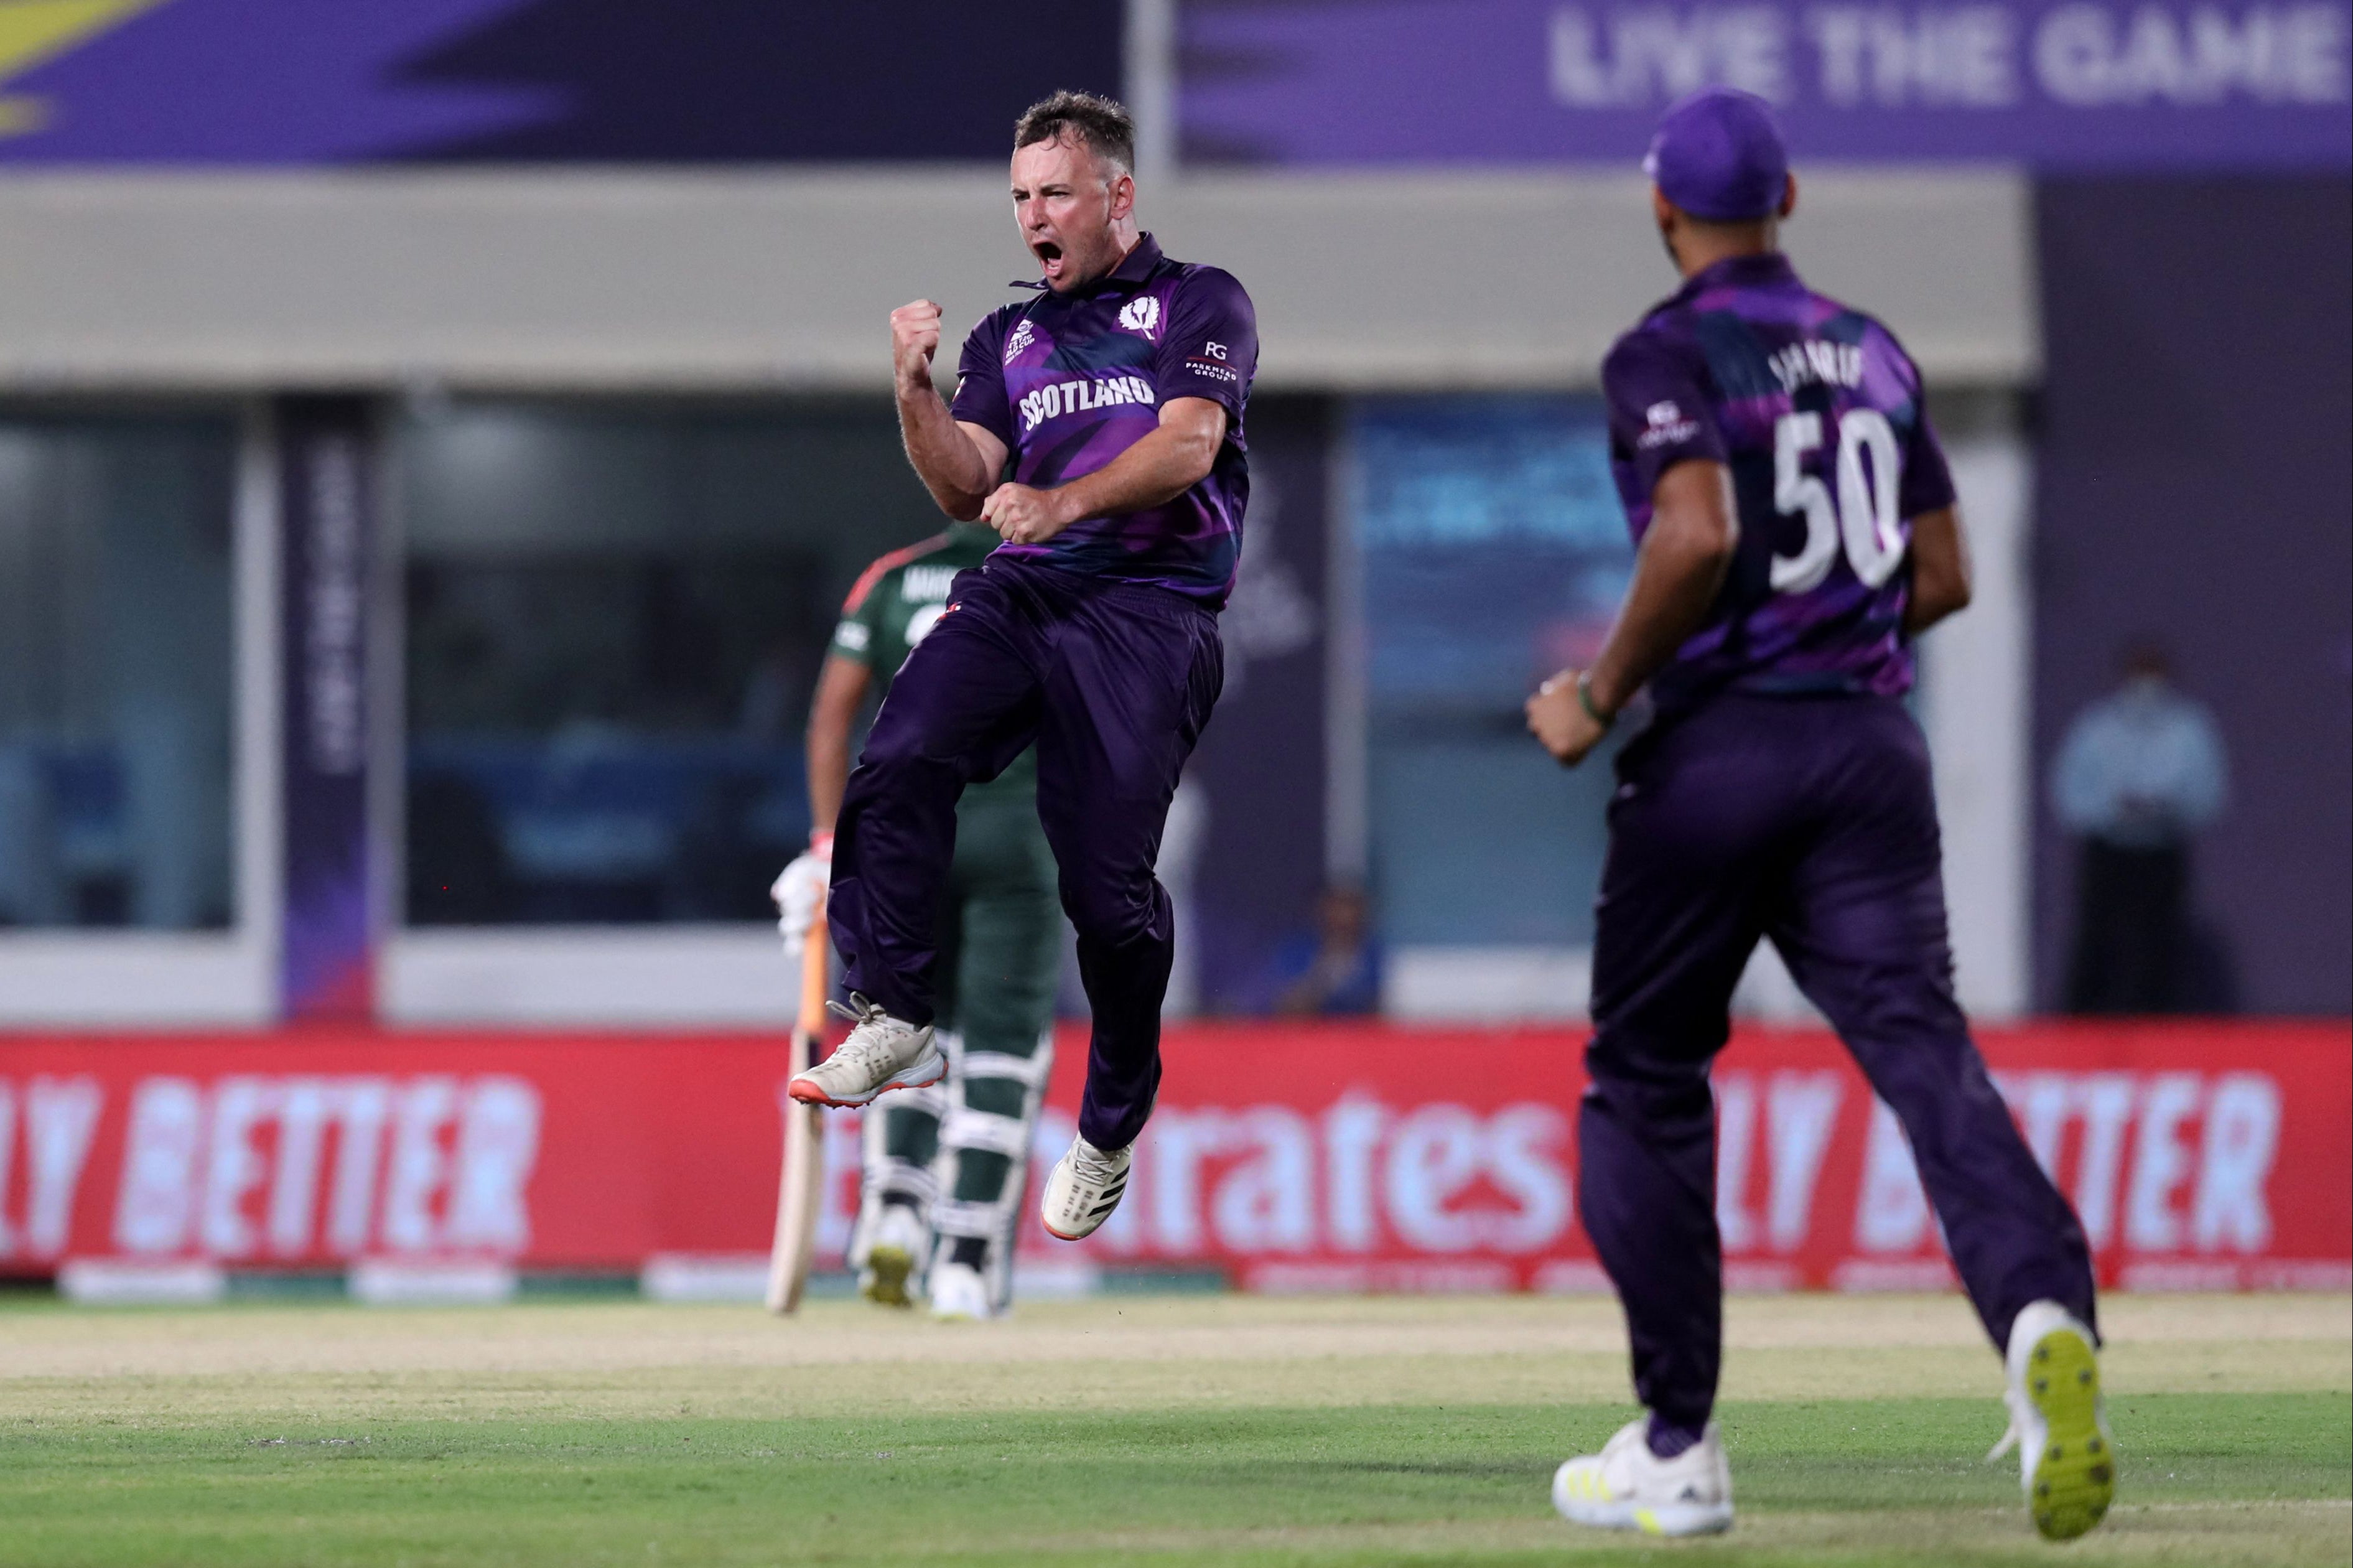 From Amazon delivery man to T20 World cup star: Chris Greaves inspiring journey